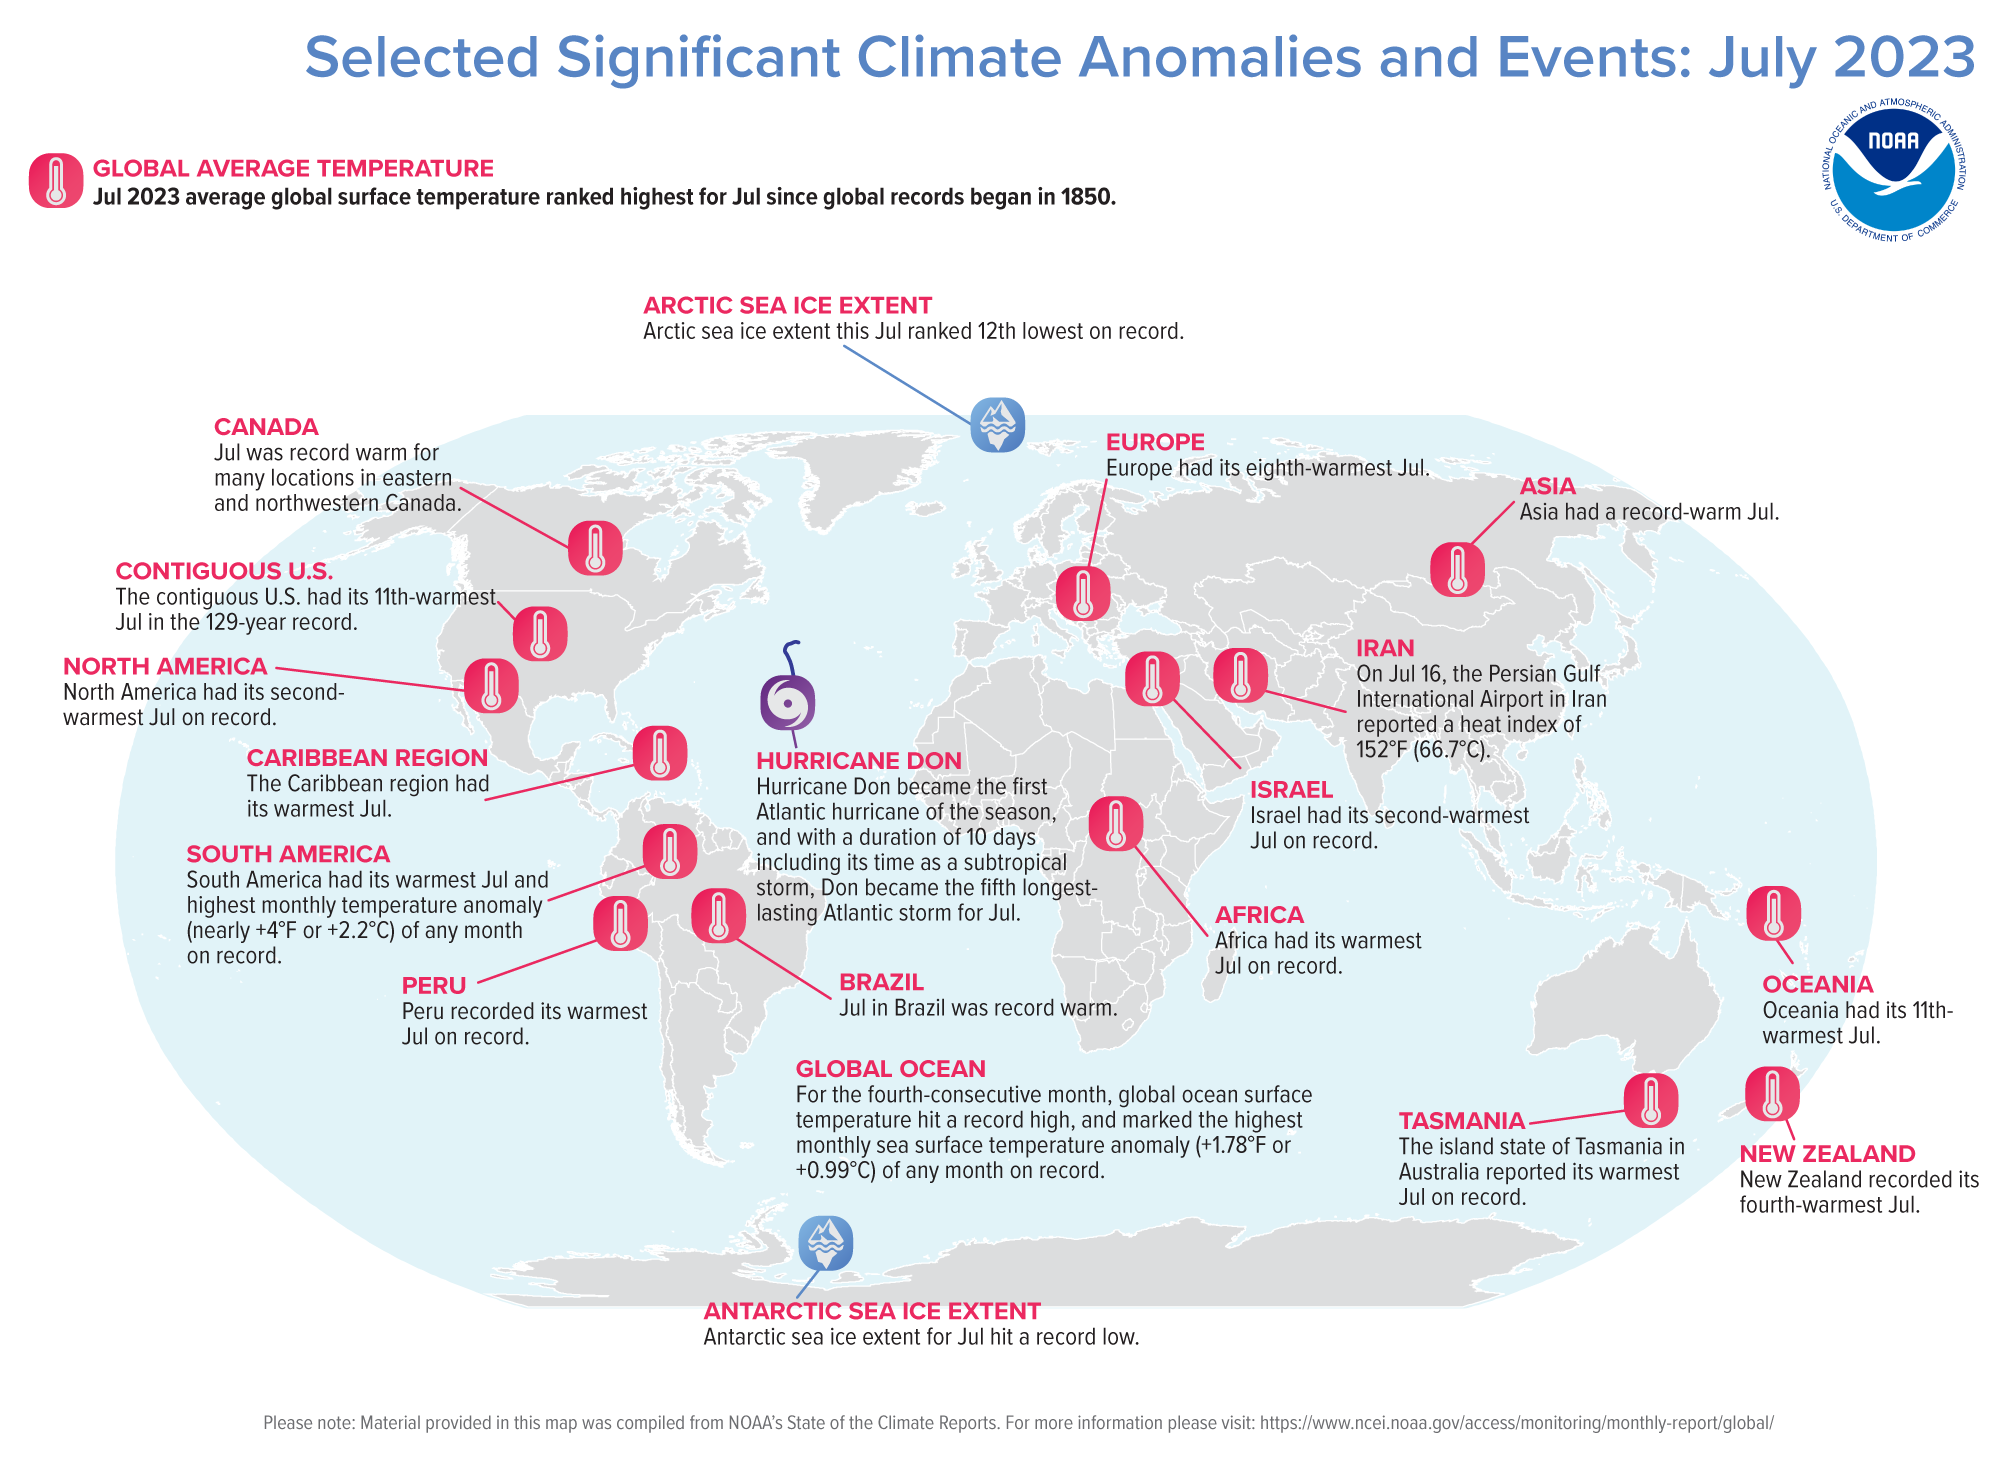 July 2023 Selected Climate Anomalies and Events Map